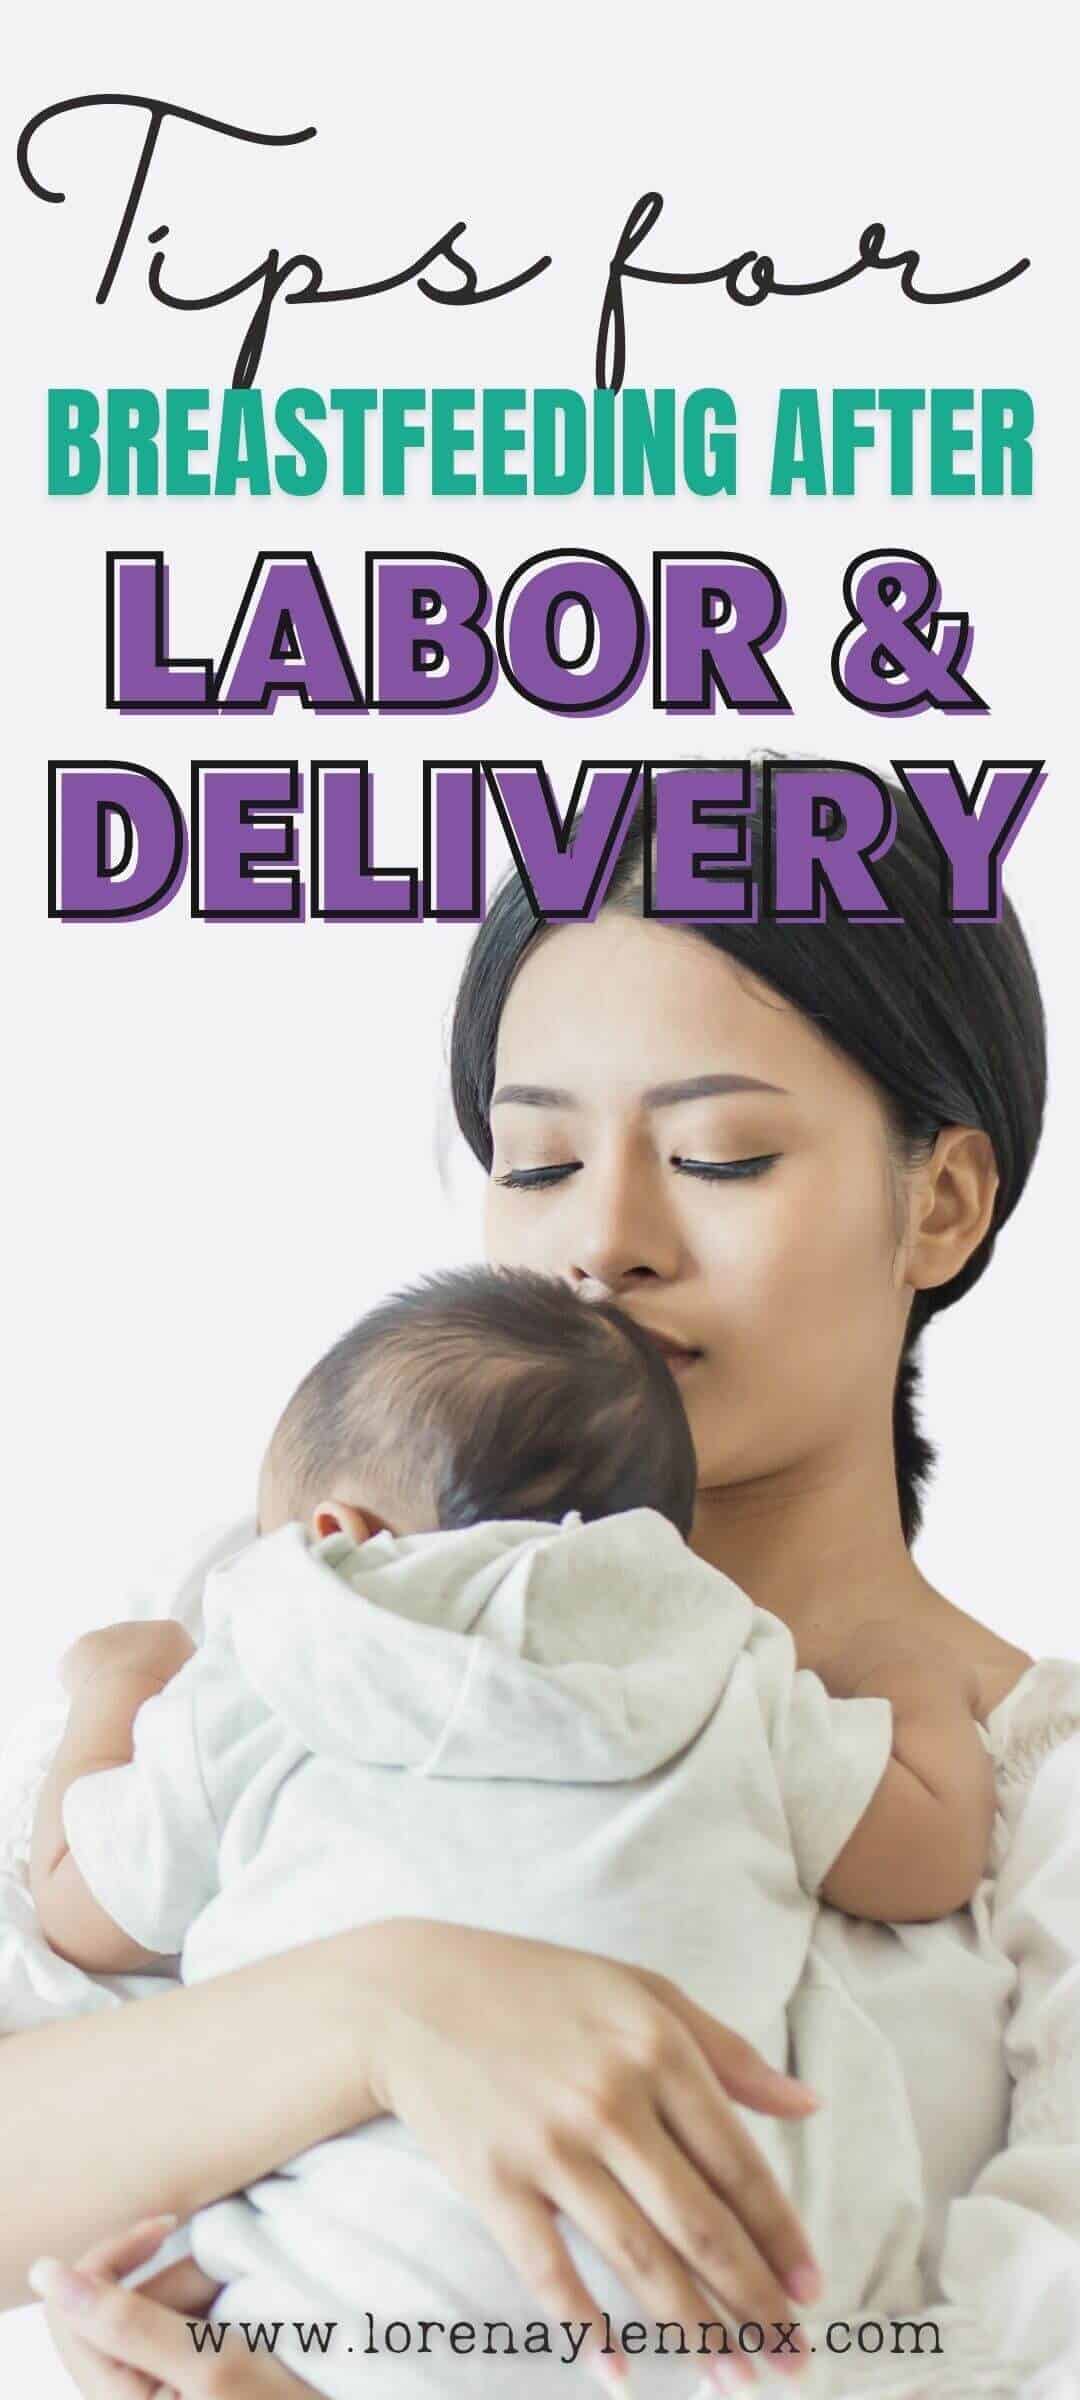 Tips for Breastfeeding After Labor and Delivery